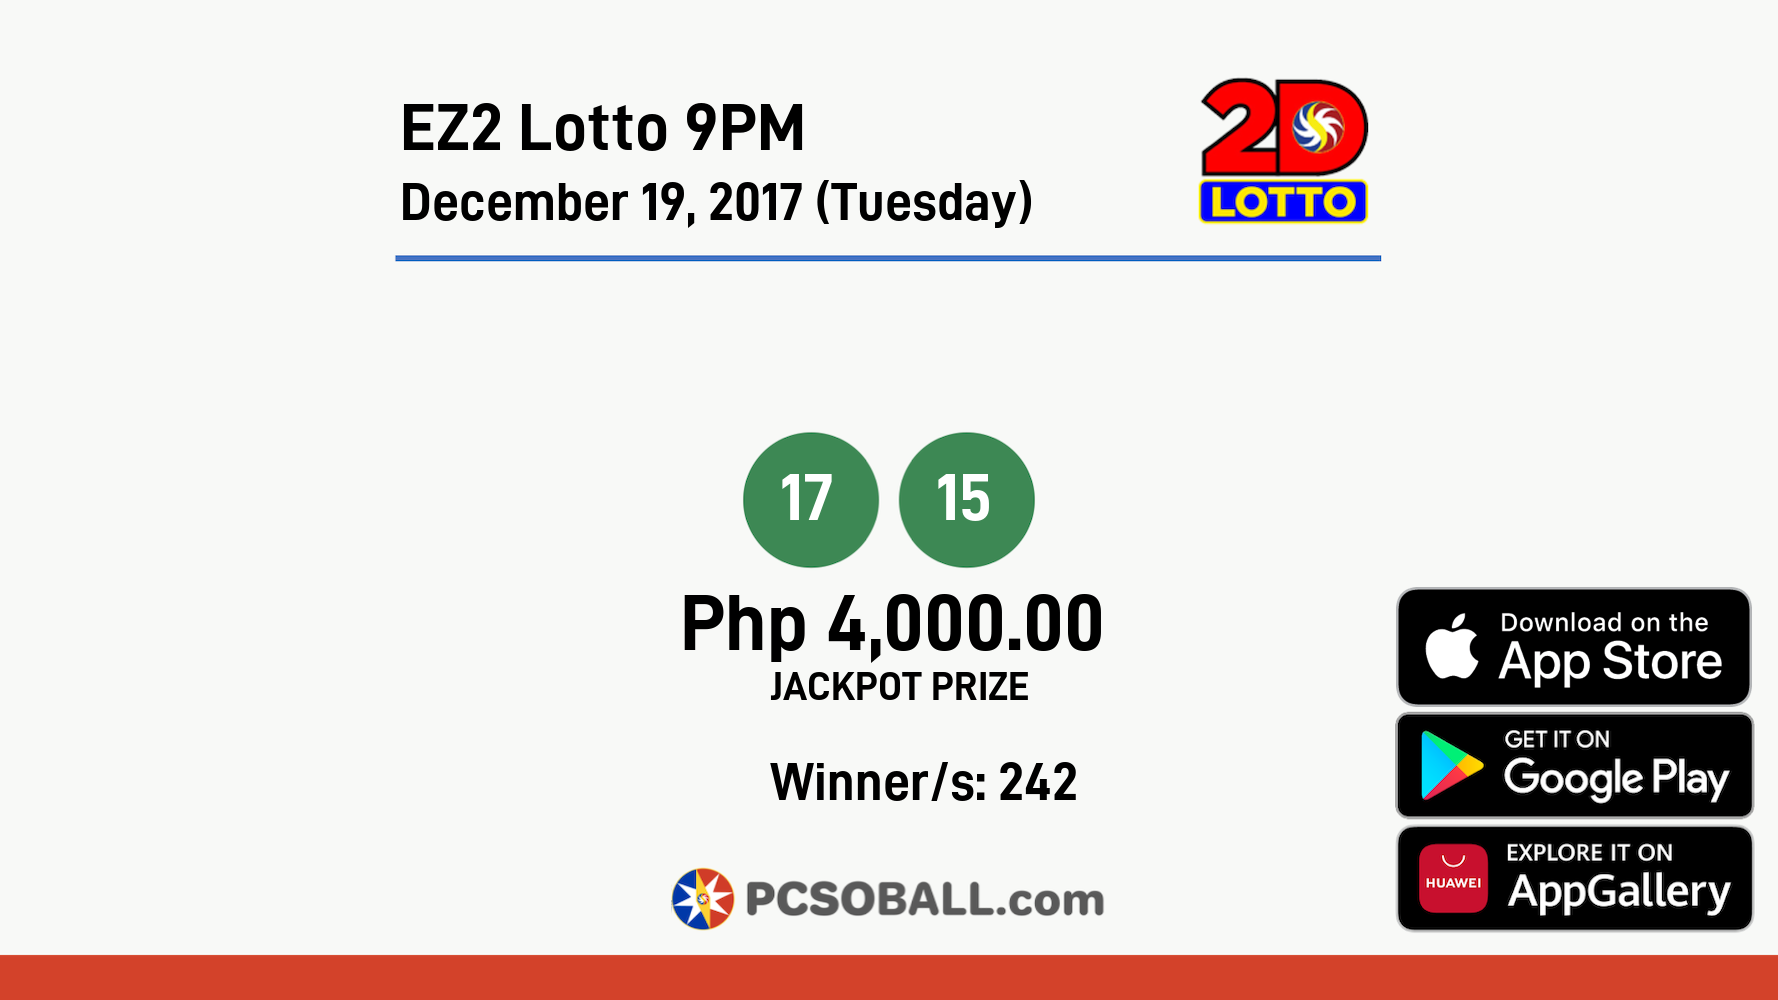 EZ2 Lotto 9PM December 19, 2017 (Tuesday) Result